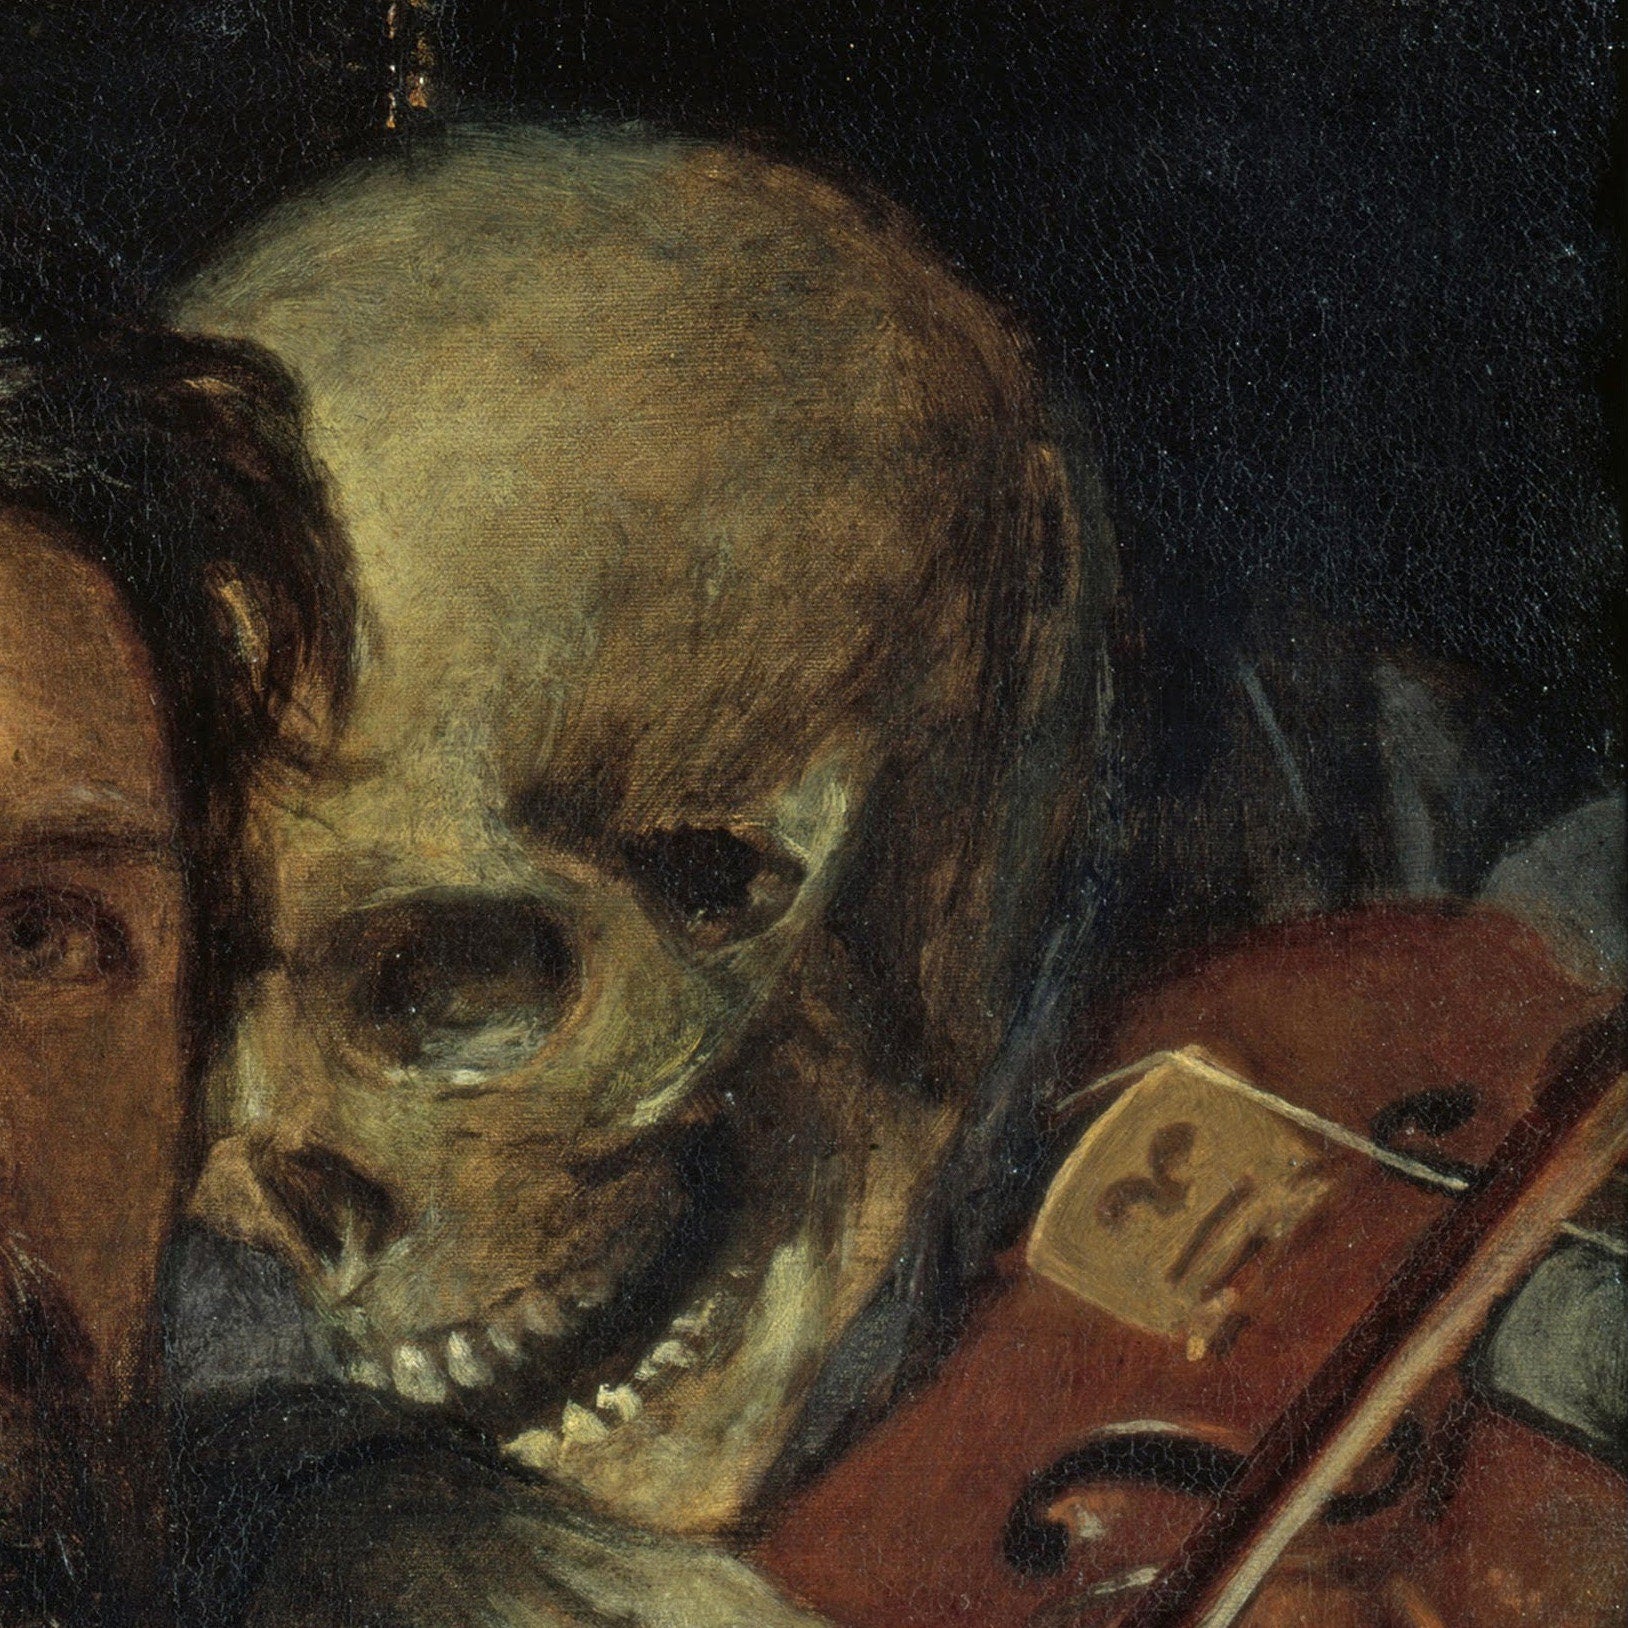 Self-Portrait with Death Playing by Arnold Böcklin, 3d Printed with texture and brush strokes looks like original oil-painting, code:339